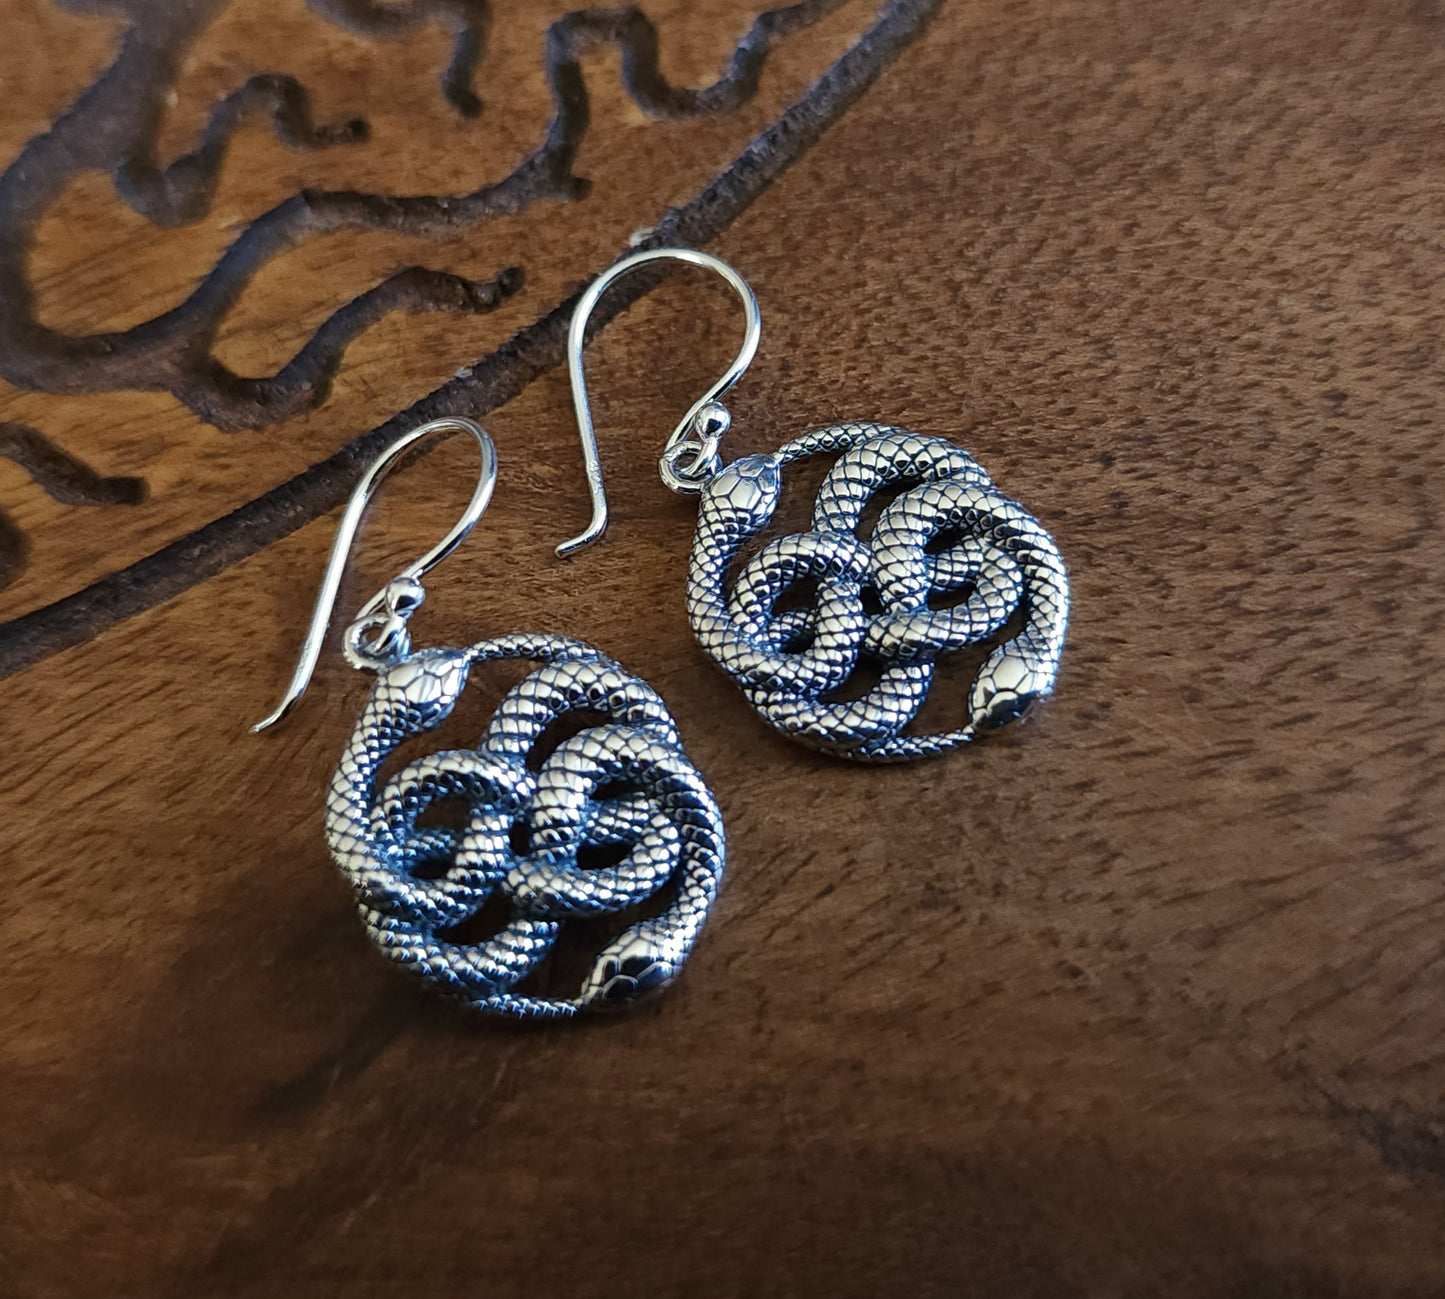 "The Auryn" Ouroboros Sterling Silver Earrings